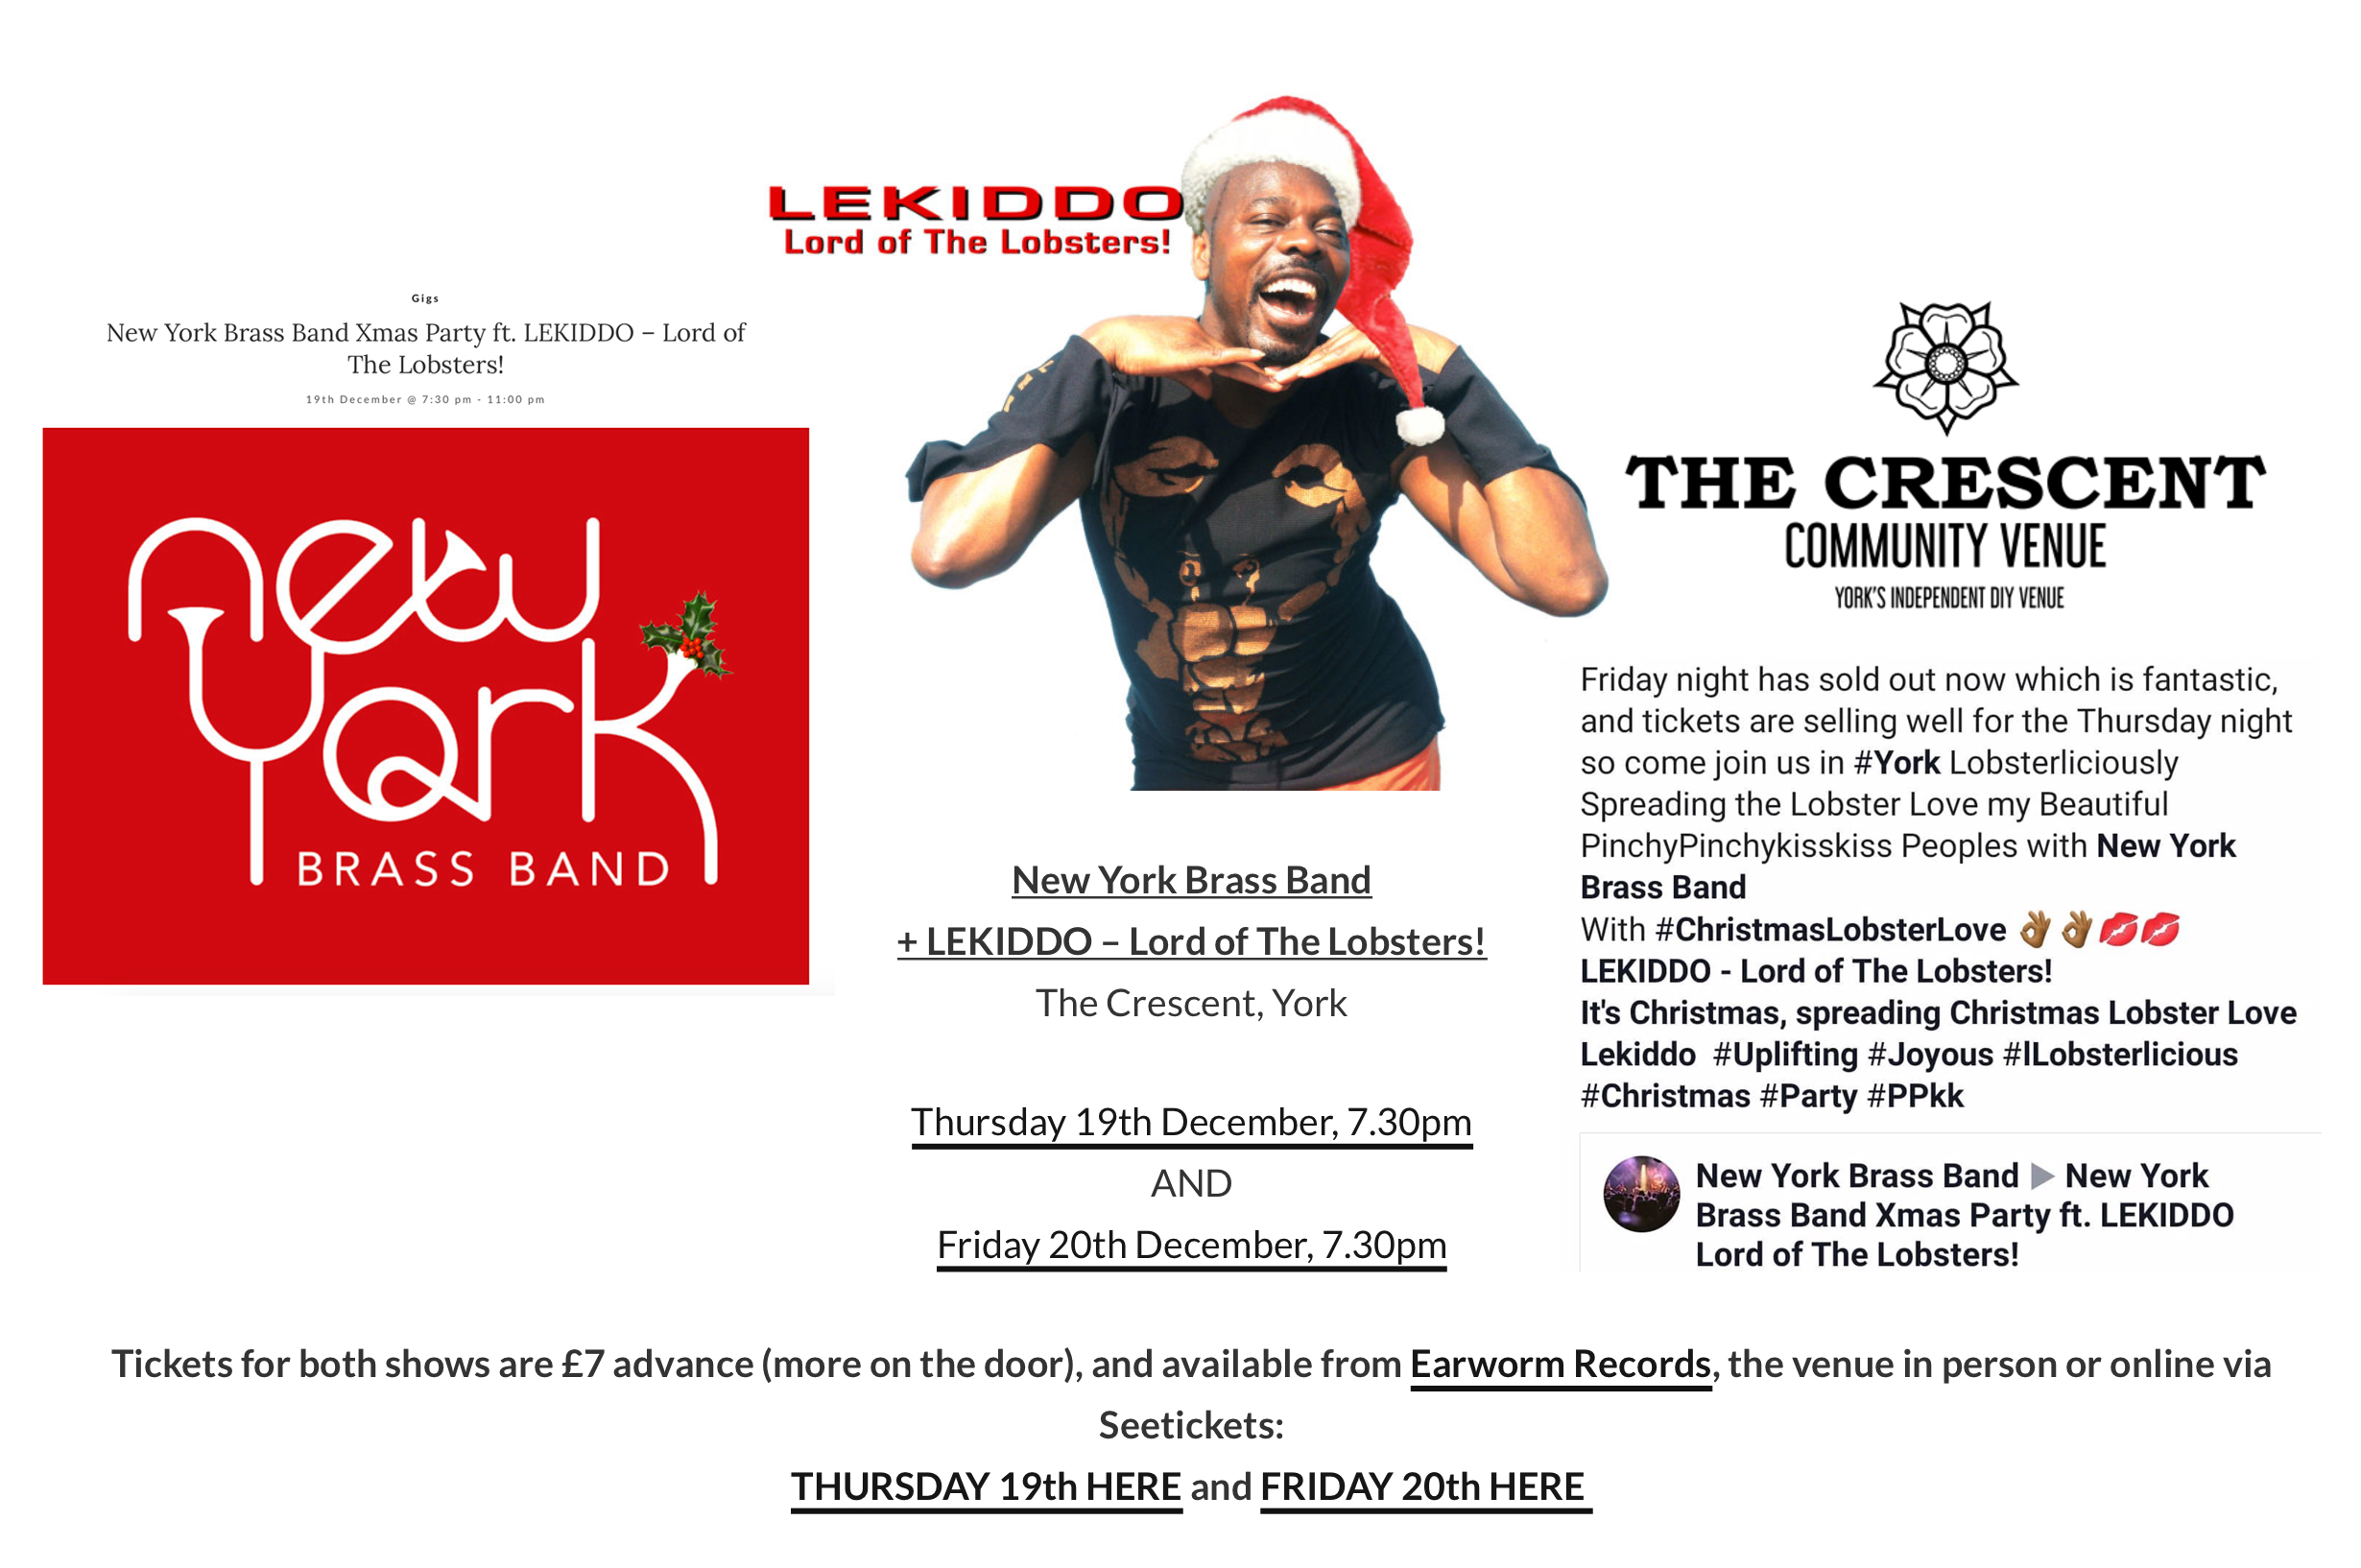 LEKIDDO - Lord of The Lobsters! live at The Cresent York supporting New York Brass Band 19 & 20 Dec 2019 #PinchyPinchykisskiss